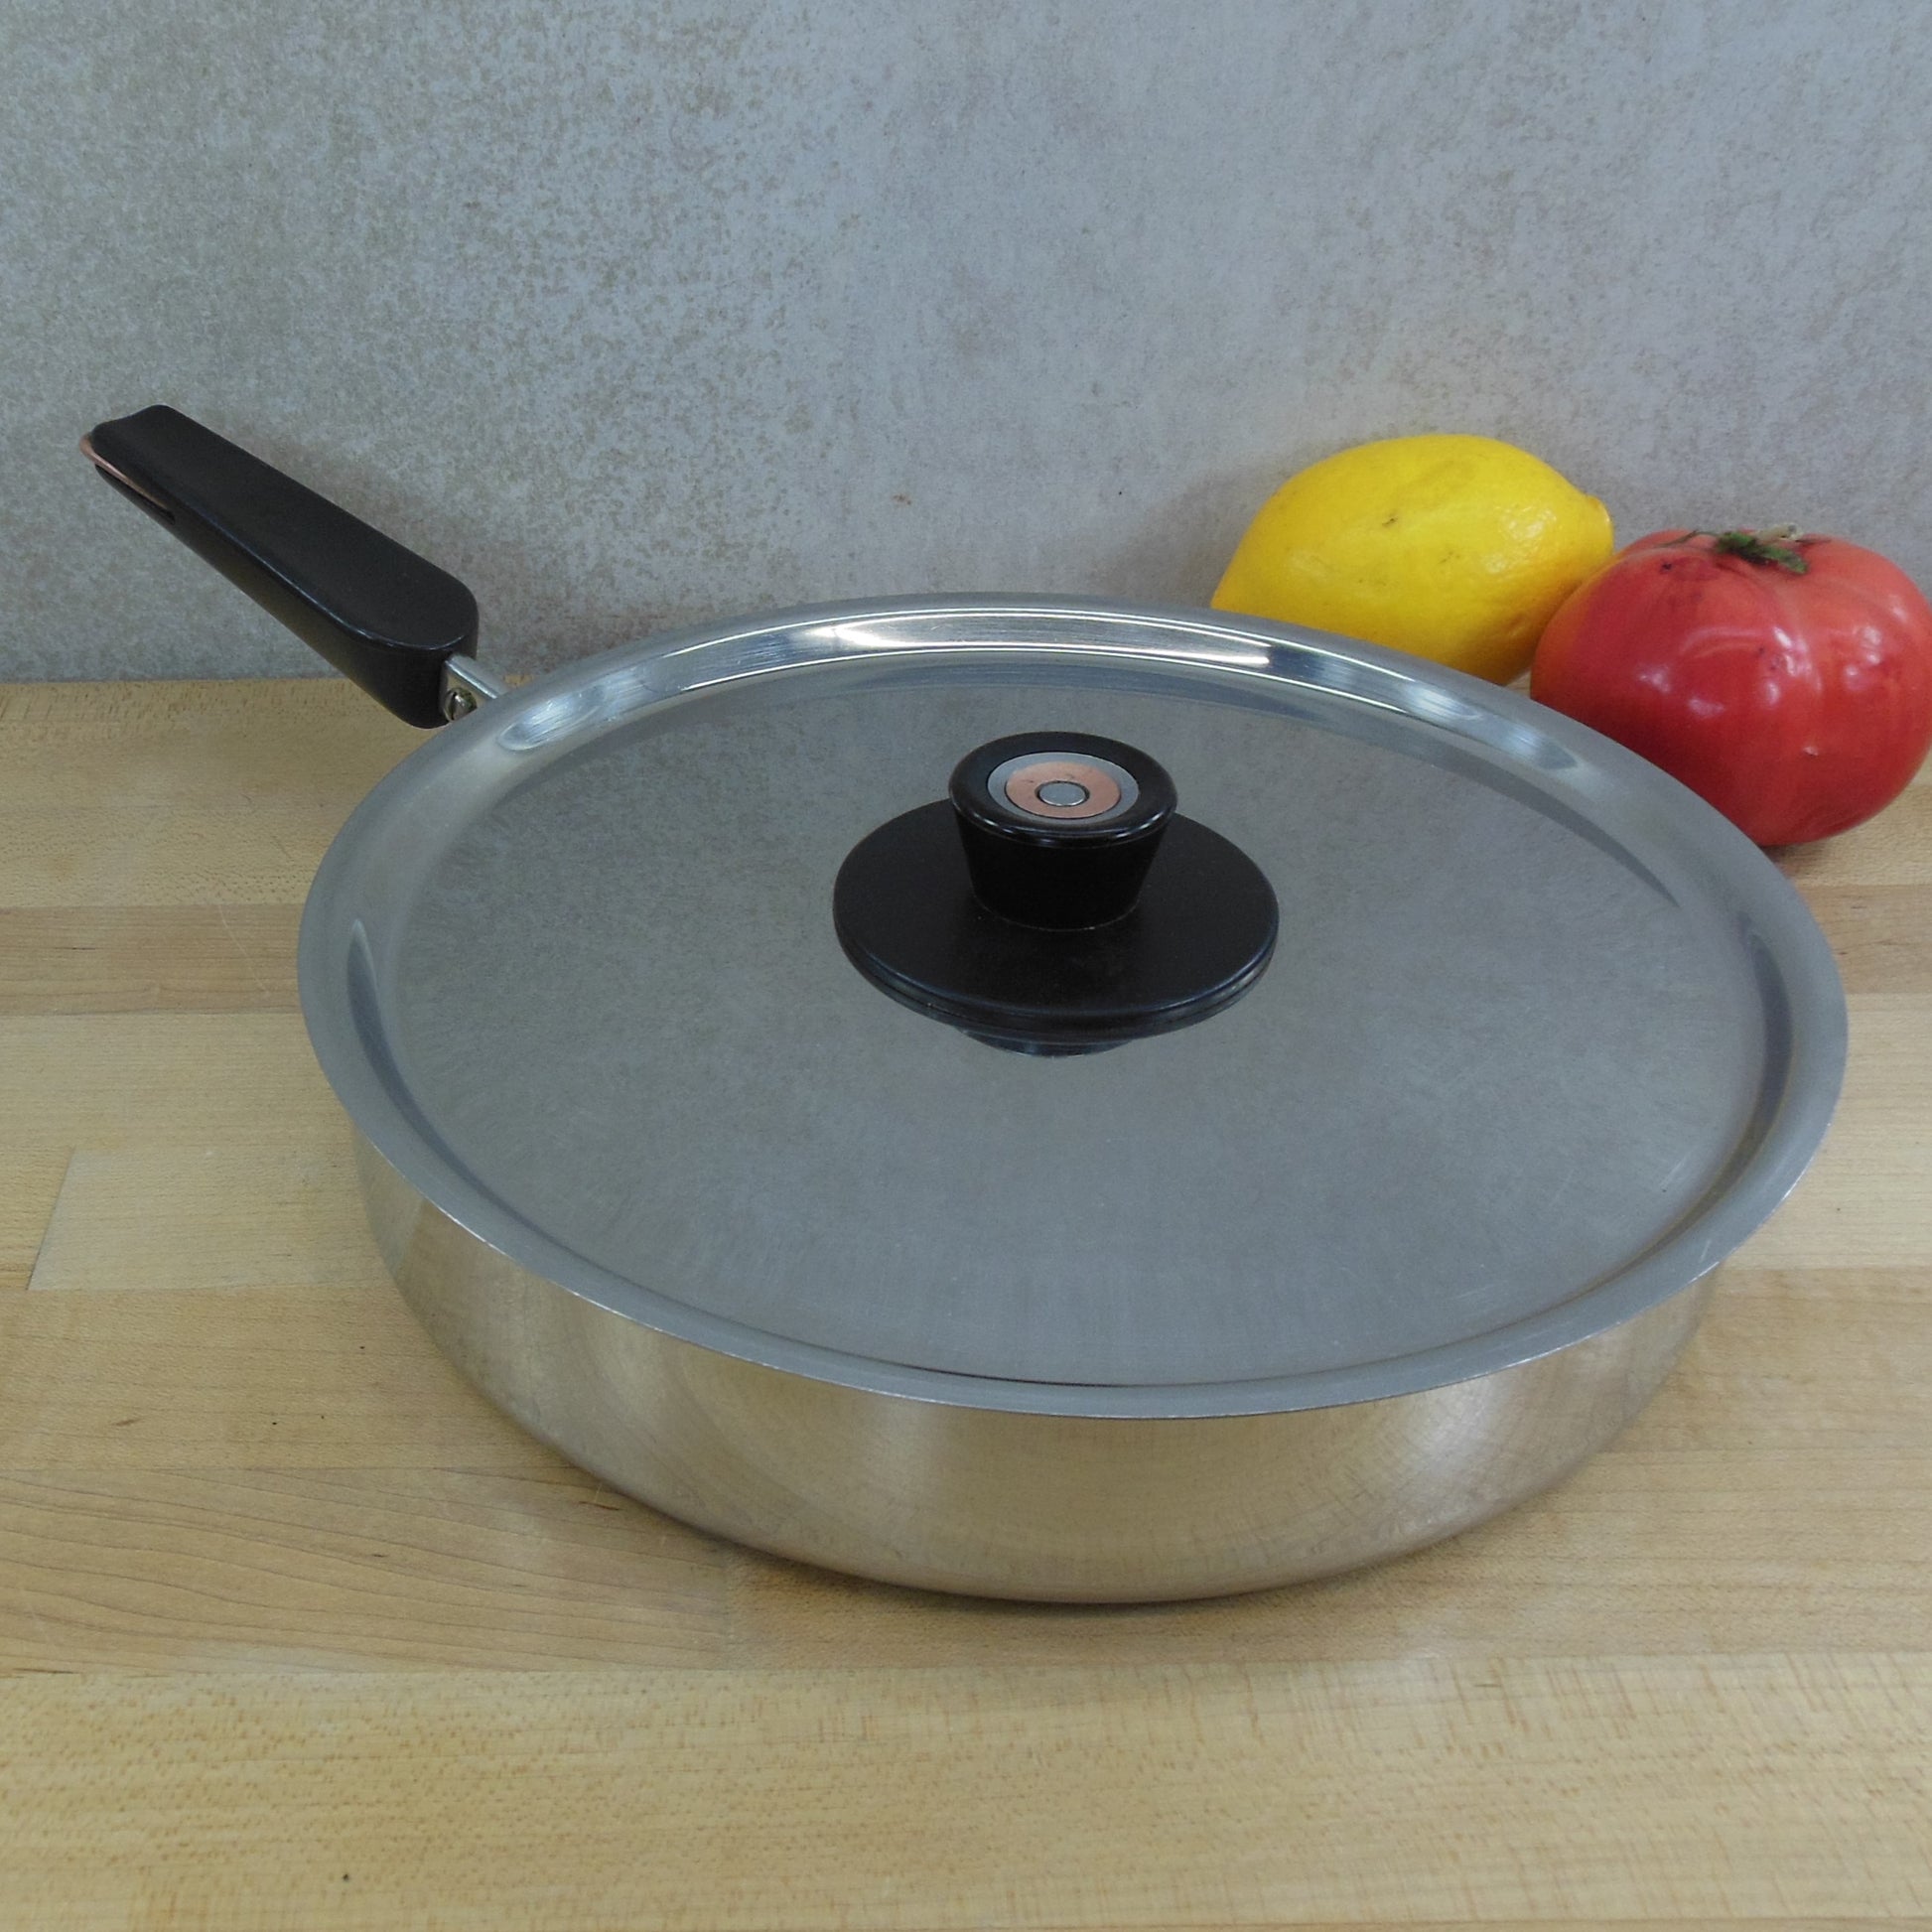 Revere Ware pots & pans - household items - by owner - housewares